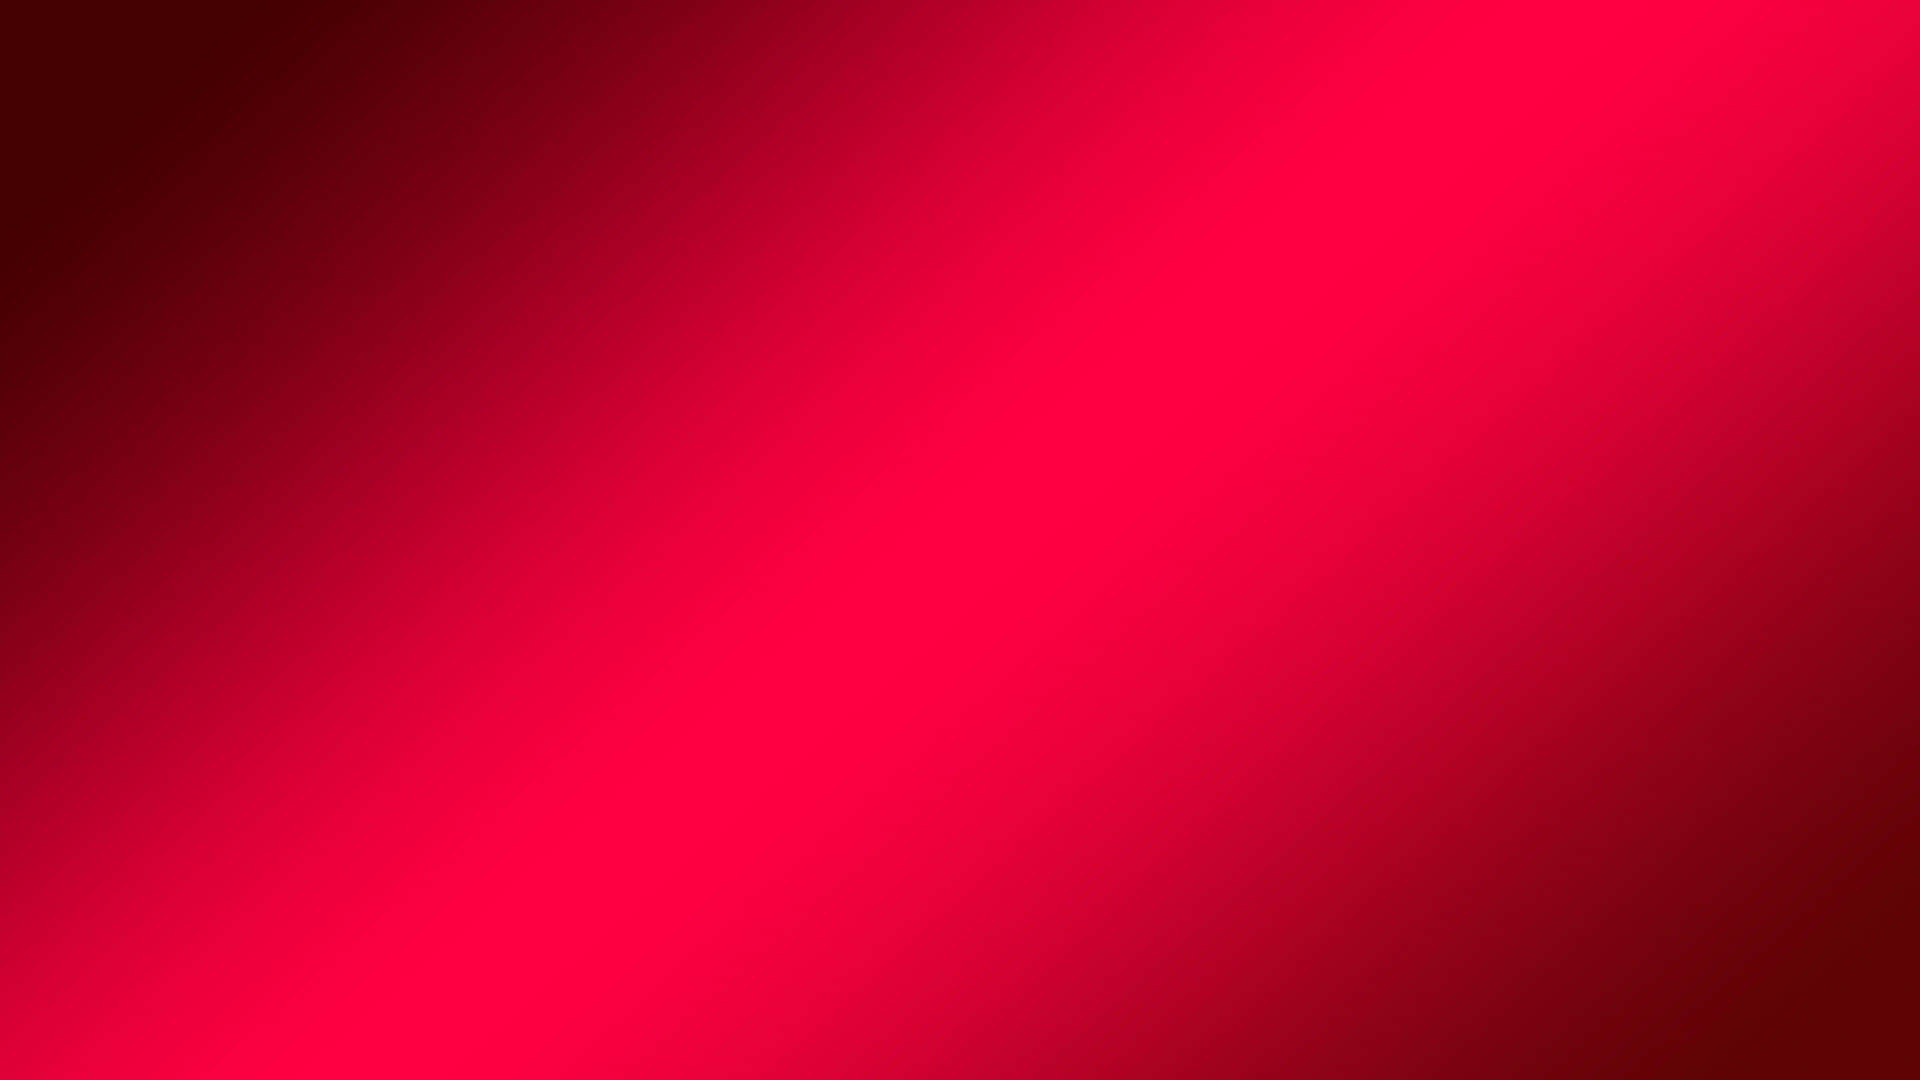 A Red Background With A Light Red Color